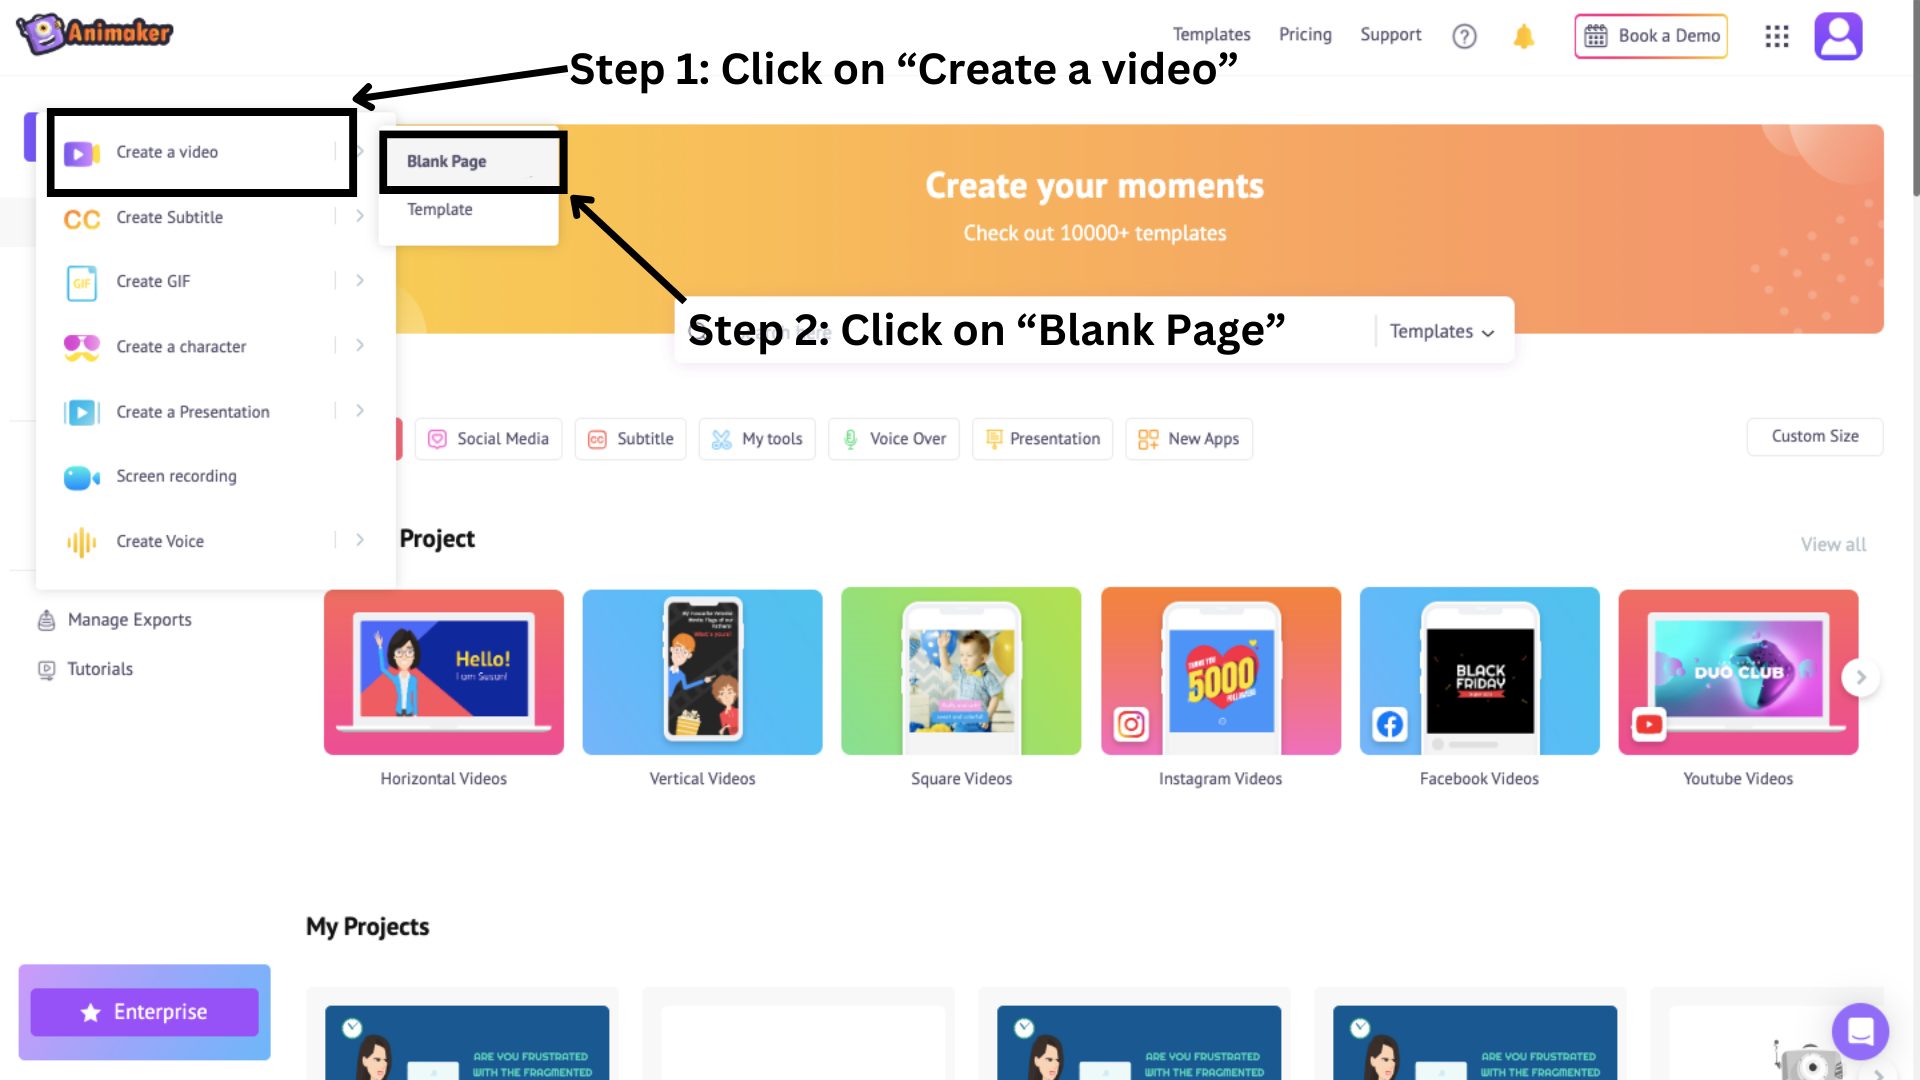 click create a video and blank page